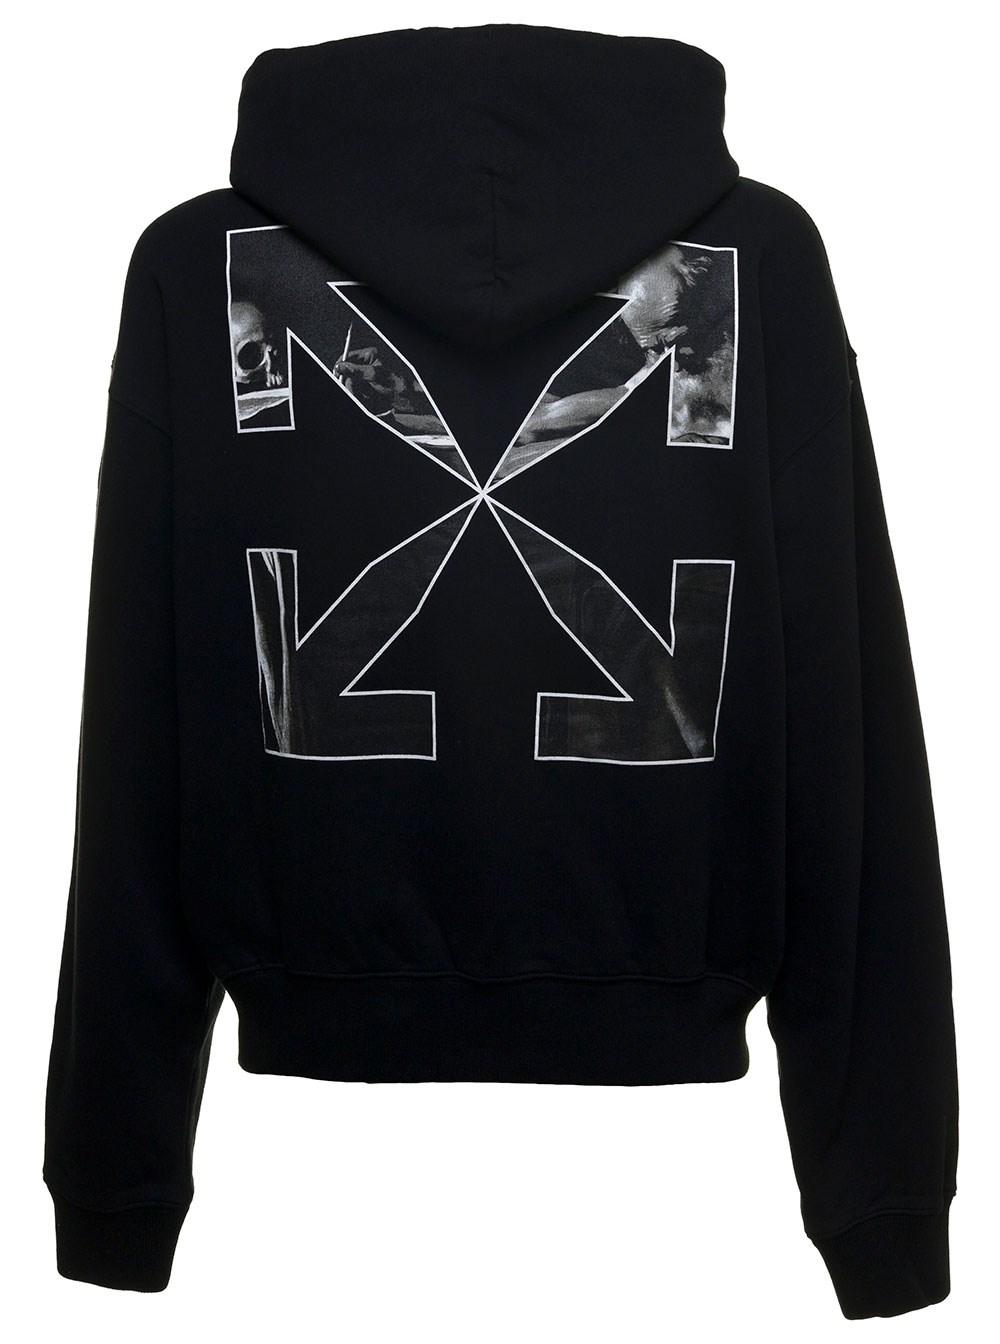 Off-White c/o Virgil Abloh Caravaggio Arrow Jersey Hoodie in Black for Men  | Lyst